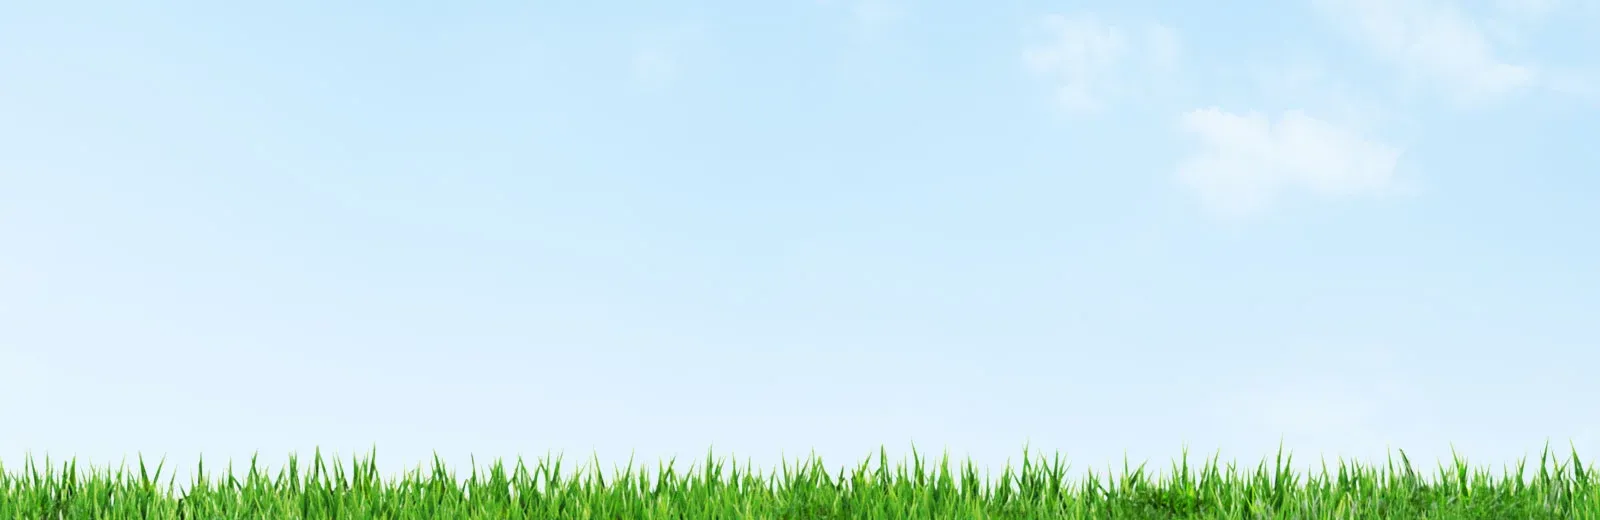 Grass and sky background